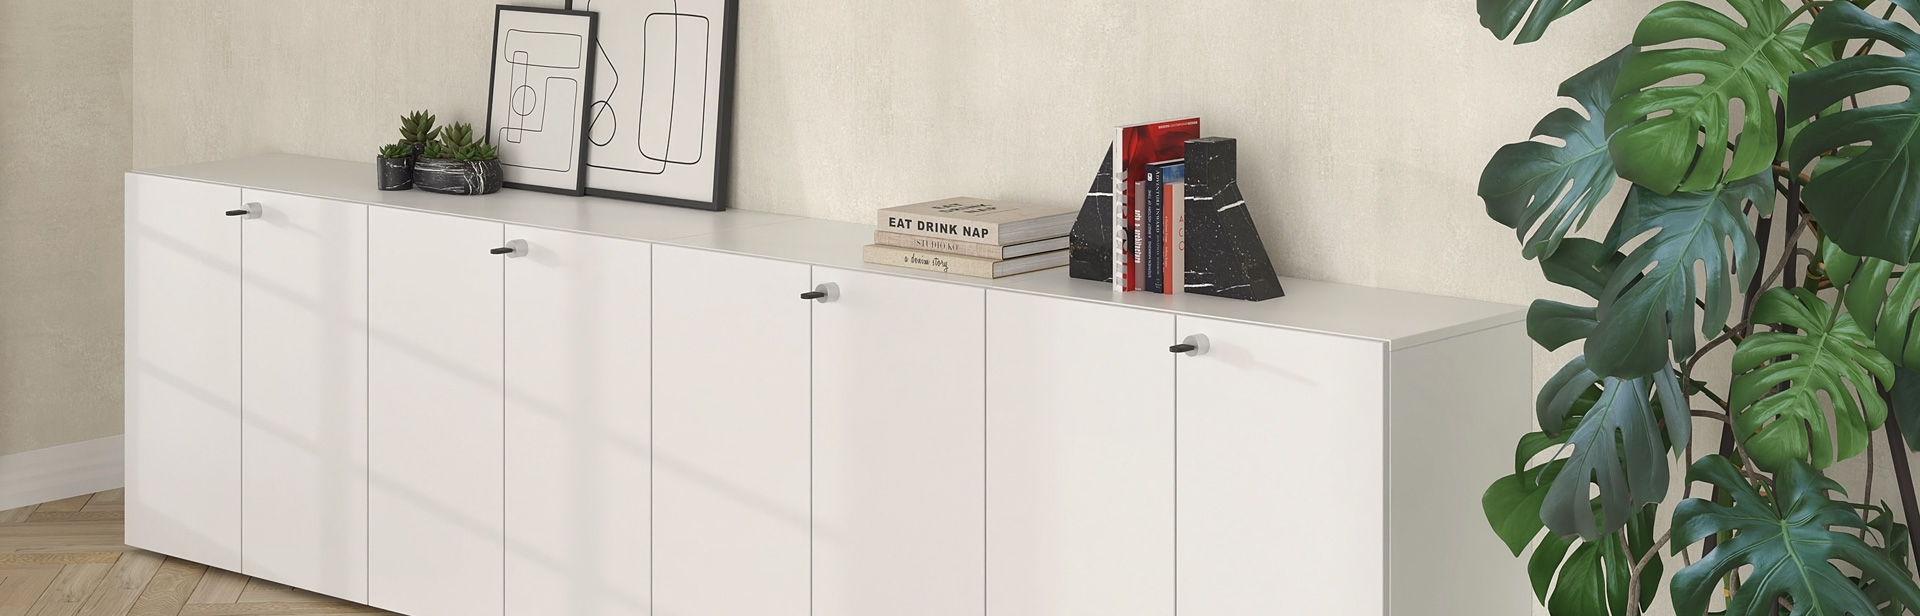 White Lacquer Cupboards in a Variety of Dimensions | Dromeas